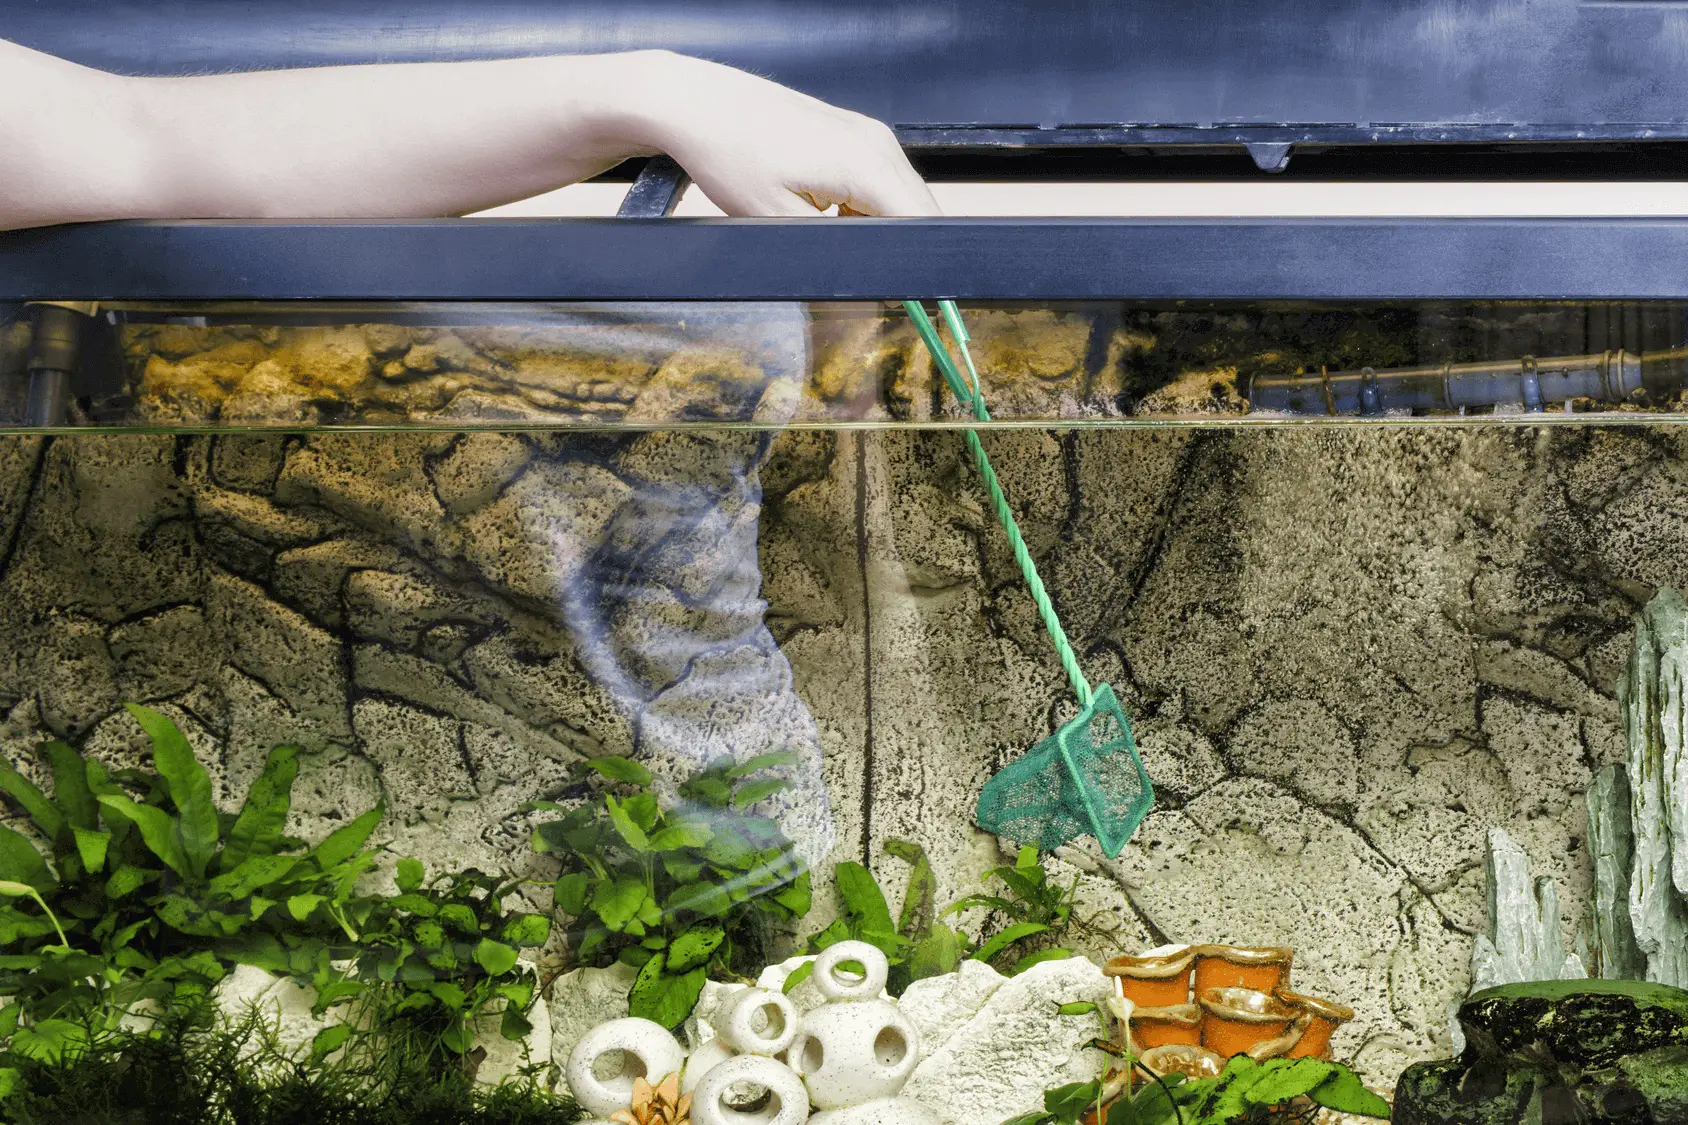 How to Clean a Fish Tank in Five Easy Steps - Fishkeeping ...